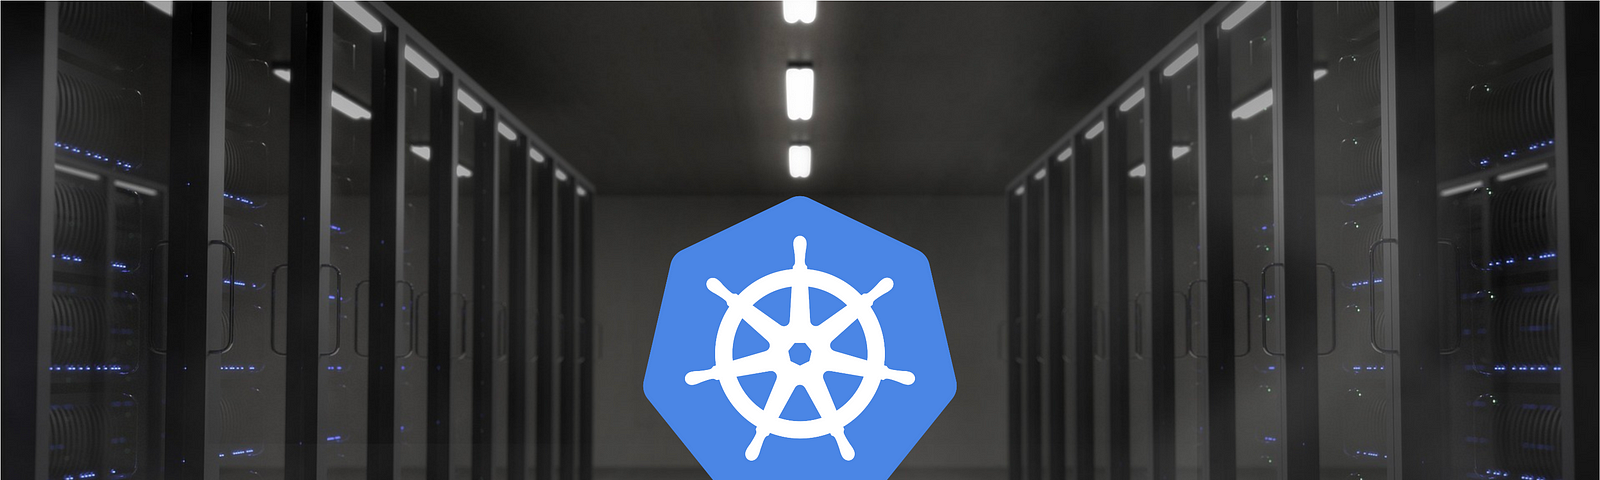 Picture of the Kubernetes logo in a data center